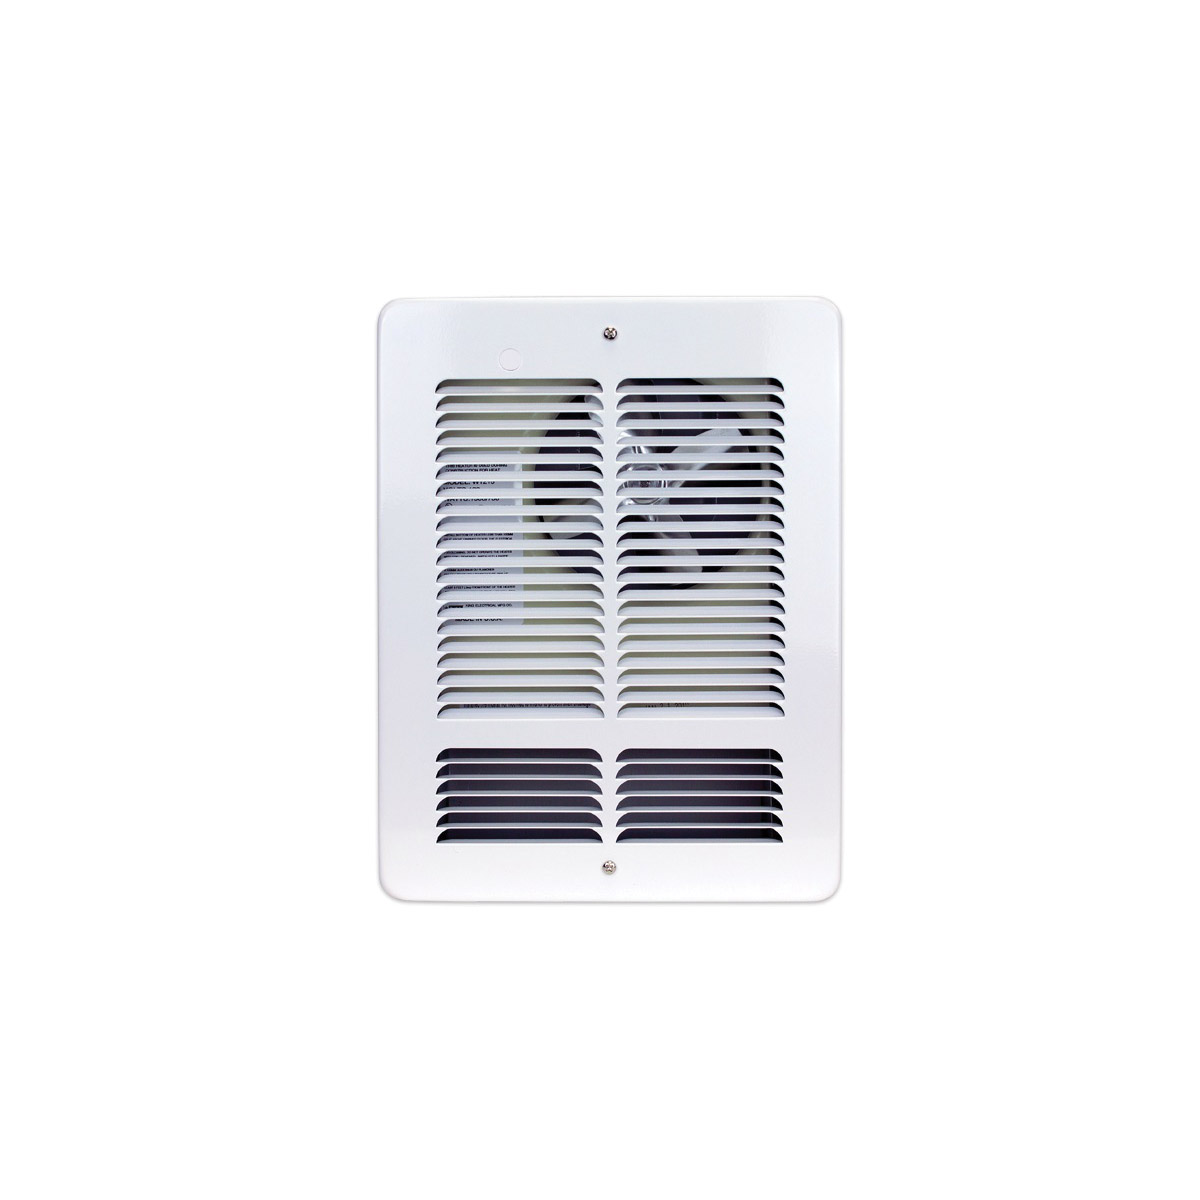 King W Series W1215-W Wall Heater, 6.3/12.5 A, 120 V, 750/1500 W, 5118 Btu/hr BTU, 400 sq-ft Heating Area, White - 3